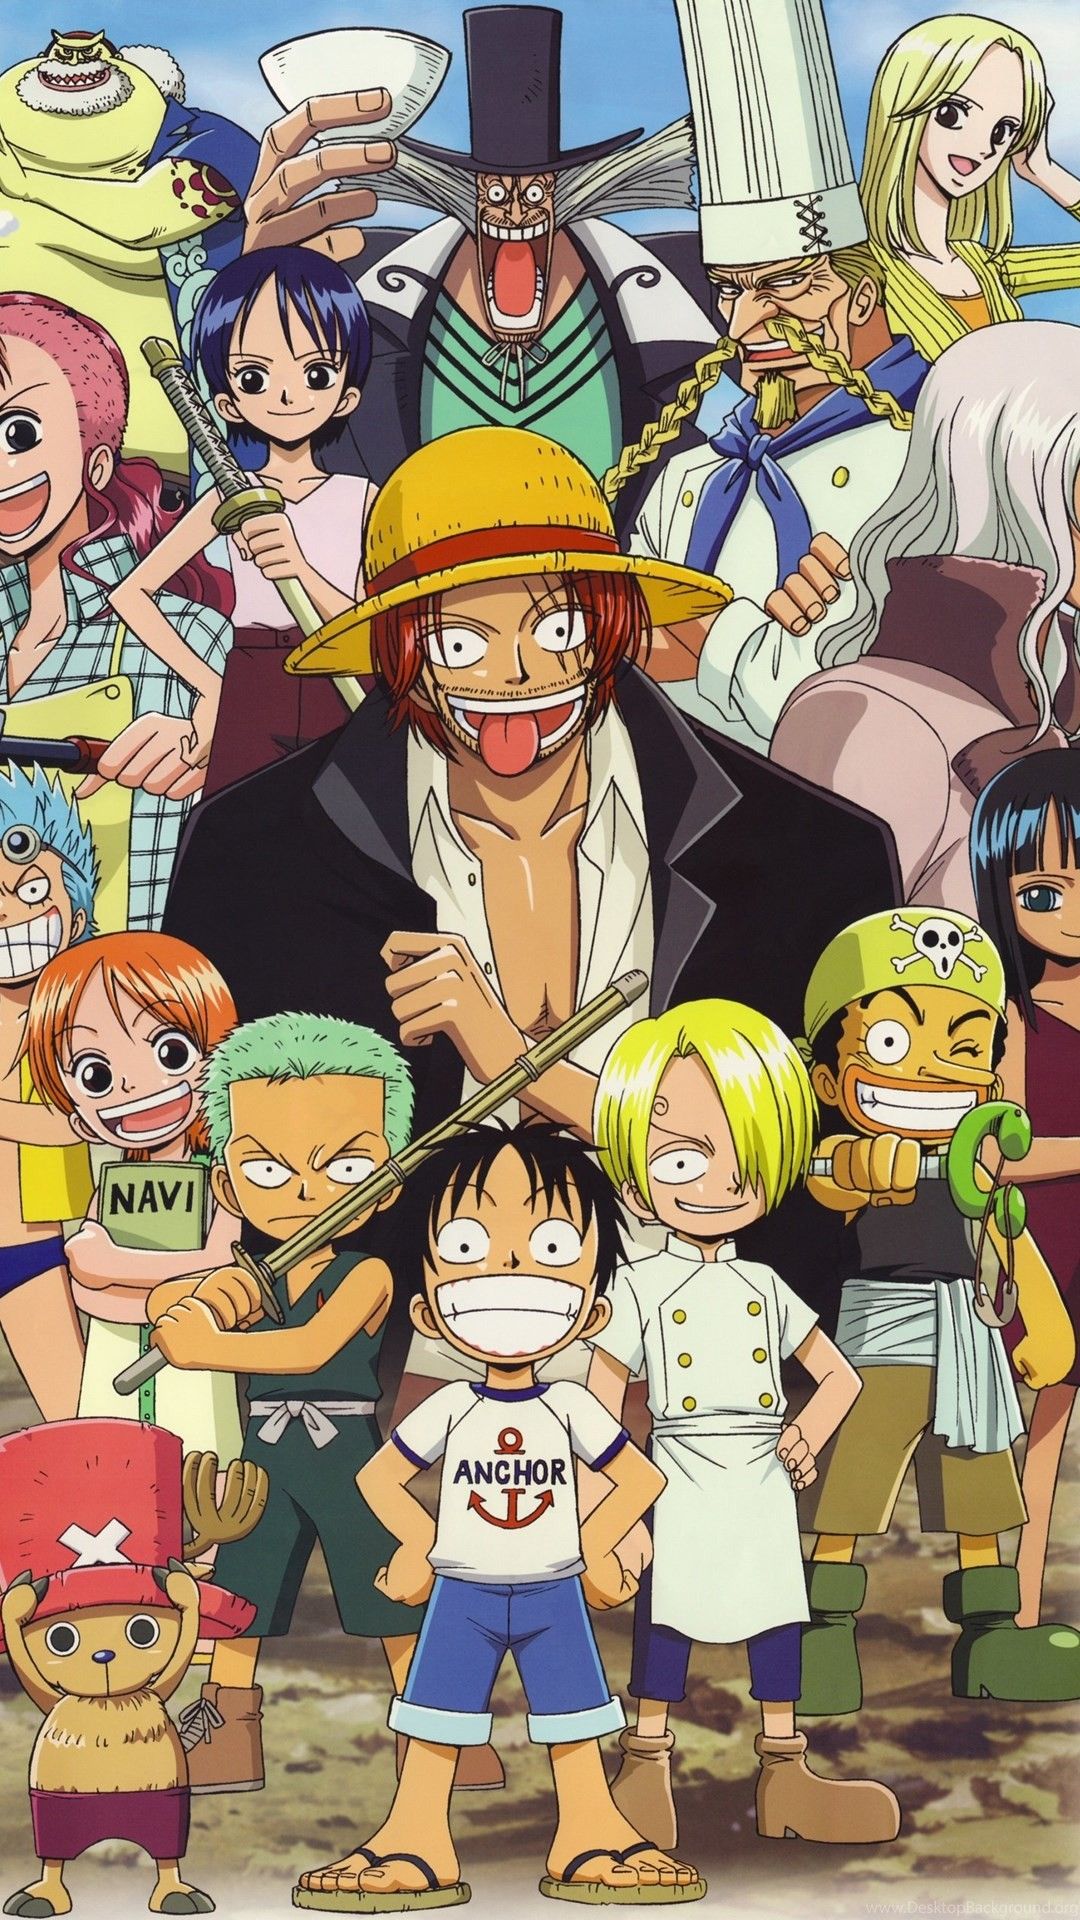 One Piece Anime ワン ピース Wallpaper HD 2018 APK pour Android Télécharger